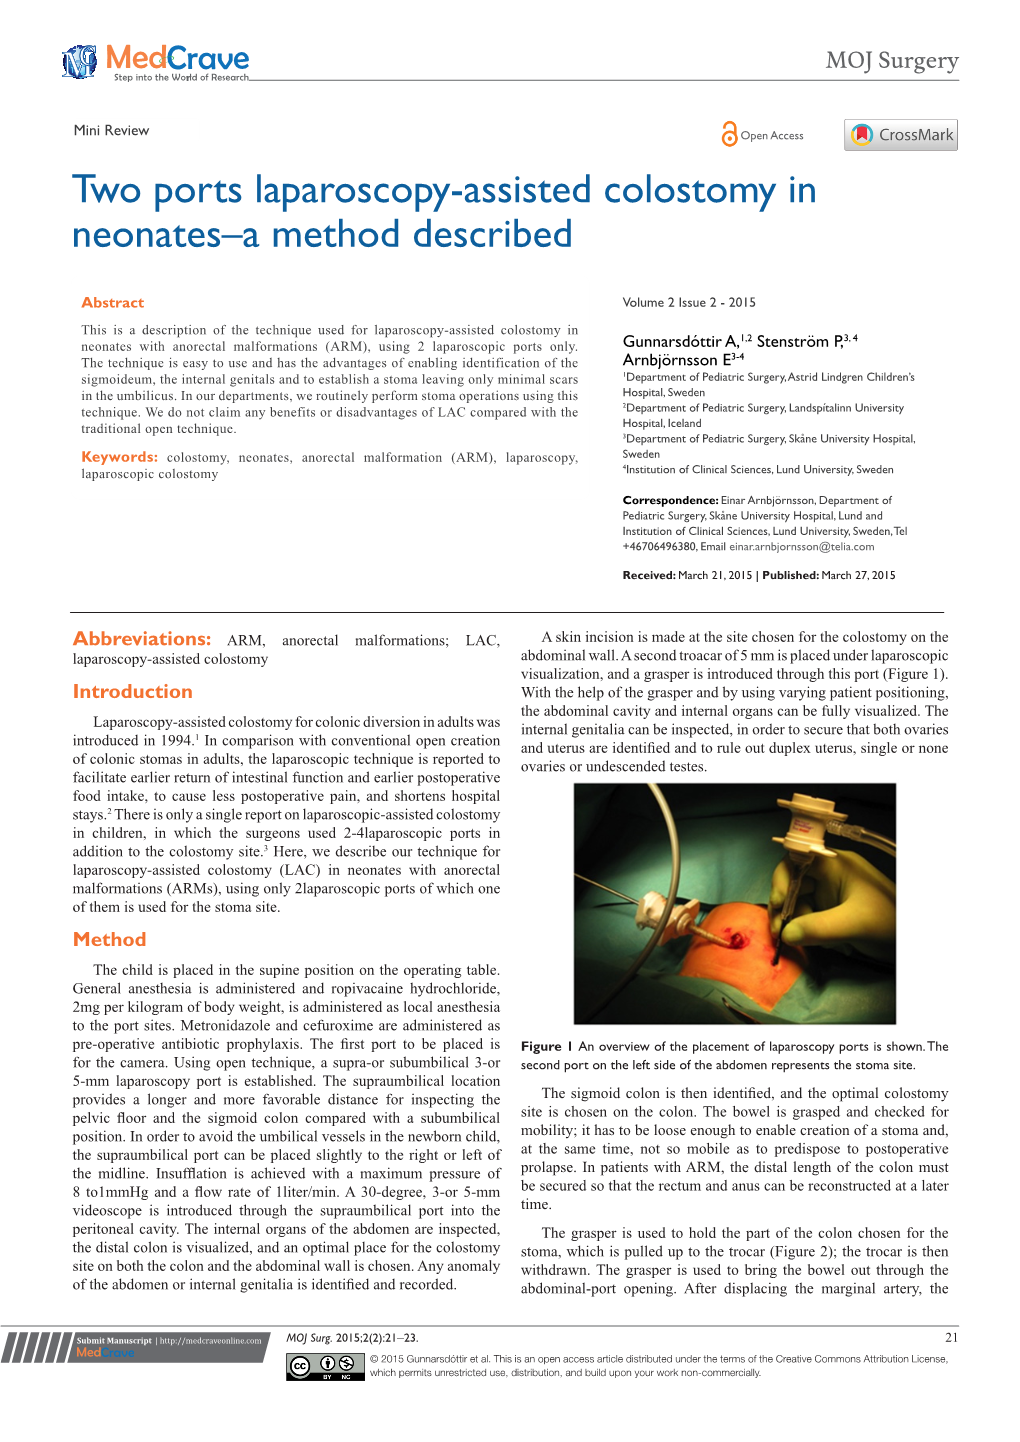 Two Ports Laparoscopy-Assisted Colostomy in Neonates–A Method Described